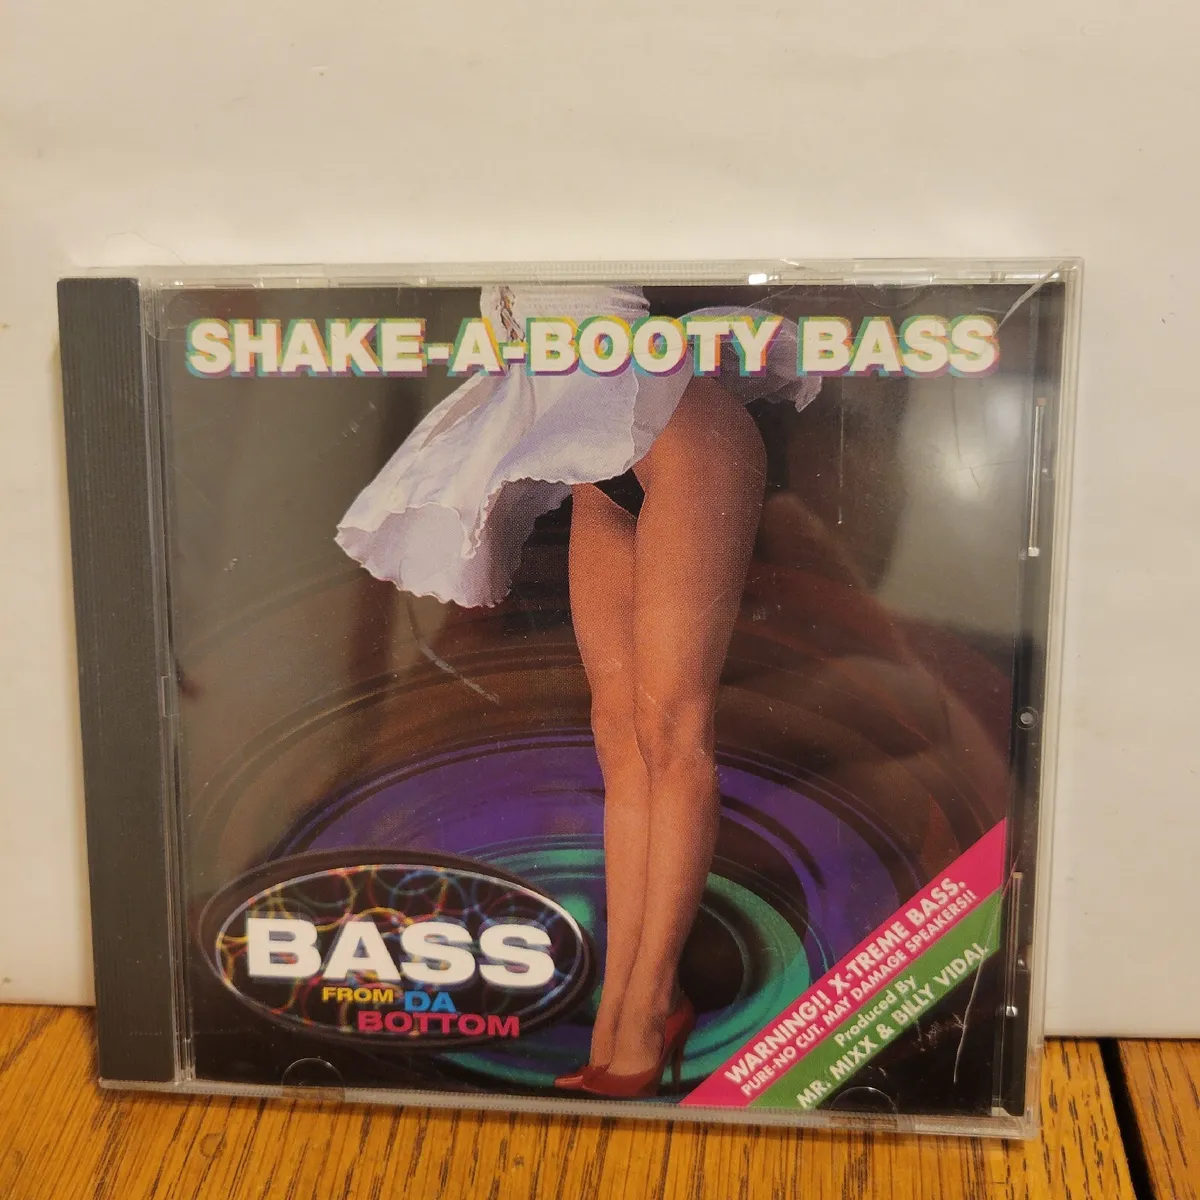 aman khattra recommends Booty Bass Shake That